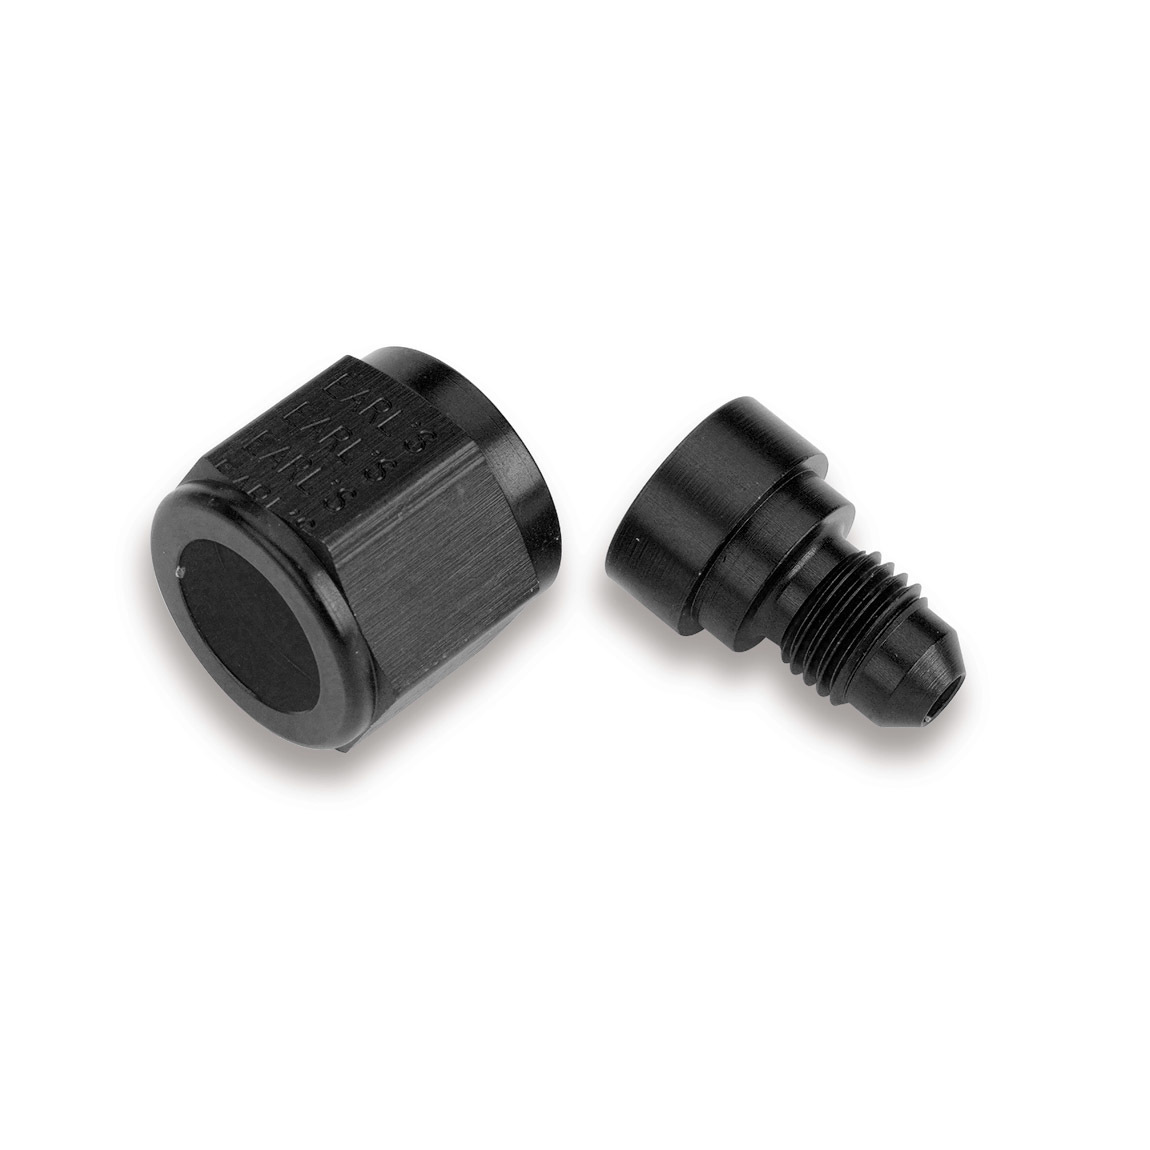 Earls AT9892084ERL Fitting, Adapter, Straight, 8 AN Female to 4 AN Male, Aluminum, Black Anodized, Each